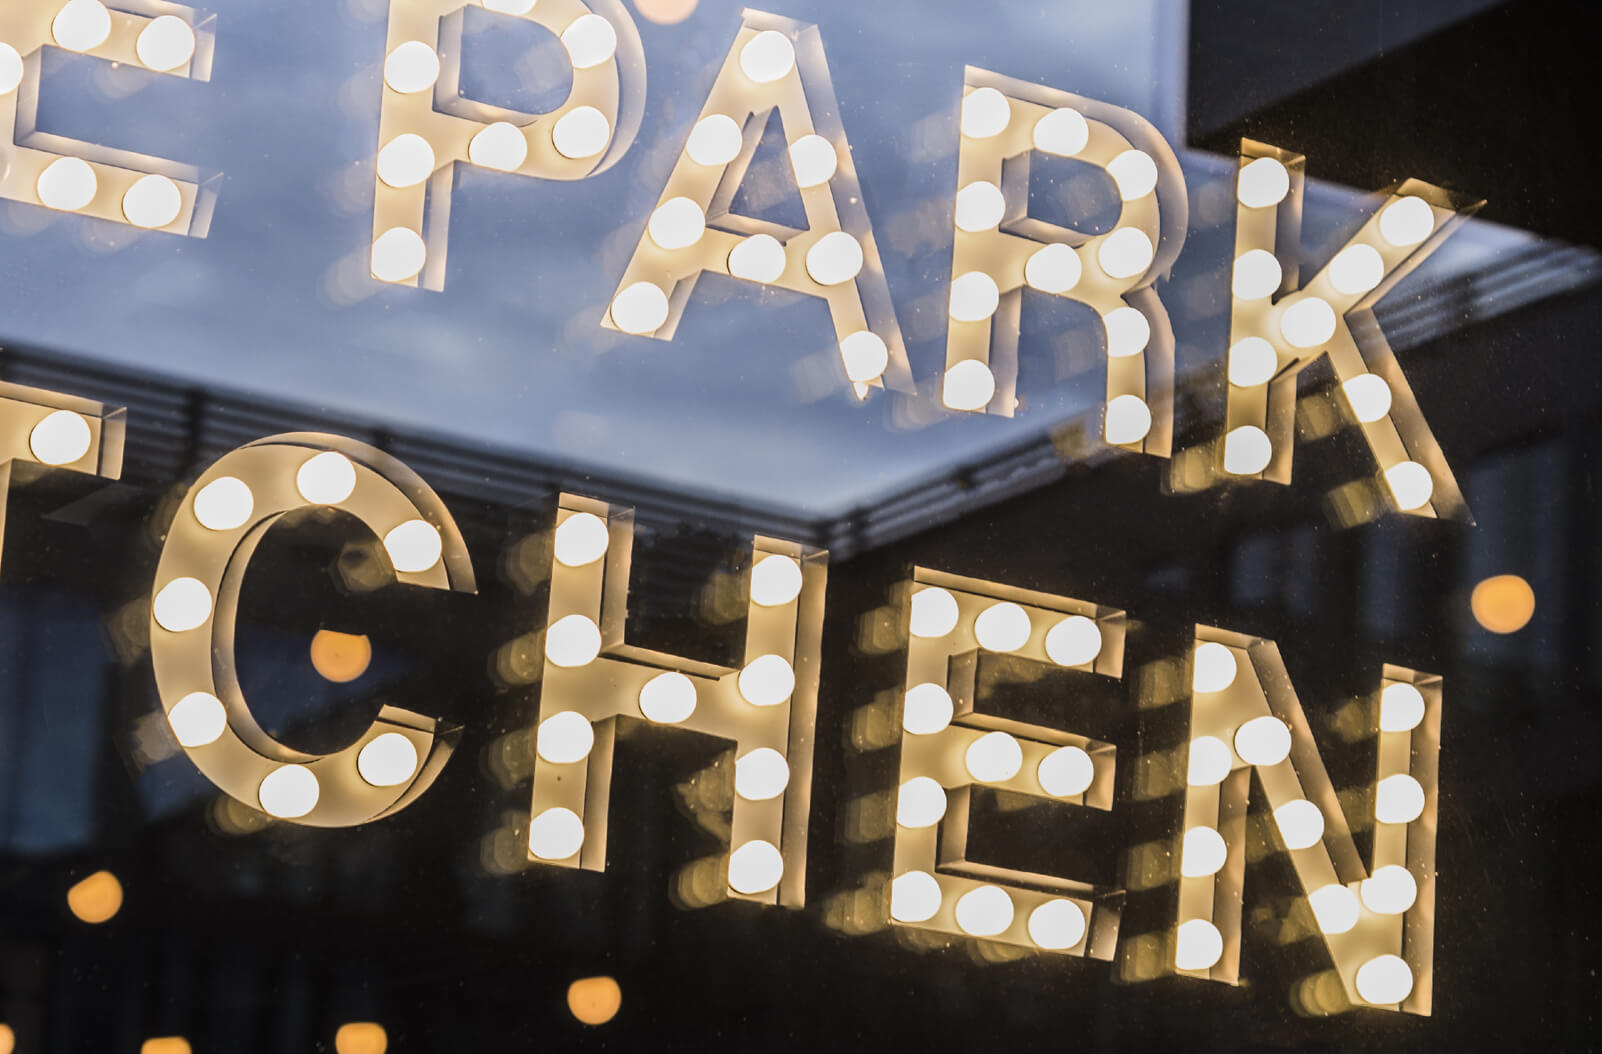 The Park Kitchen - The Park Kitchen - small letters with bulbs behind the glass